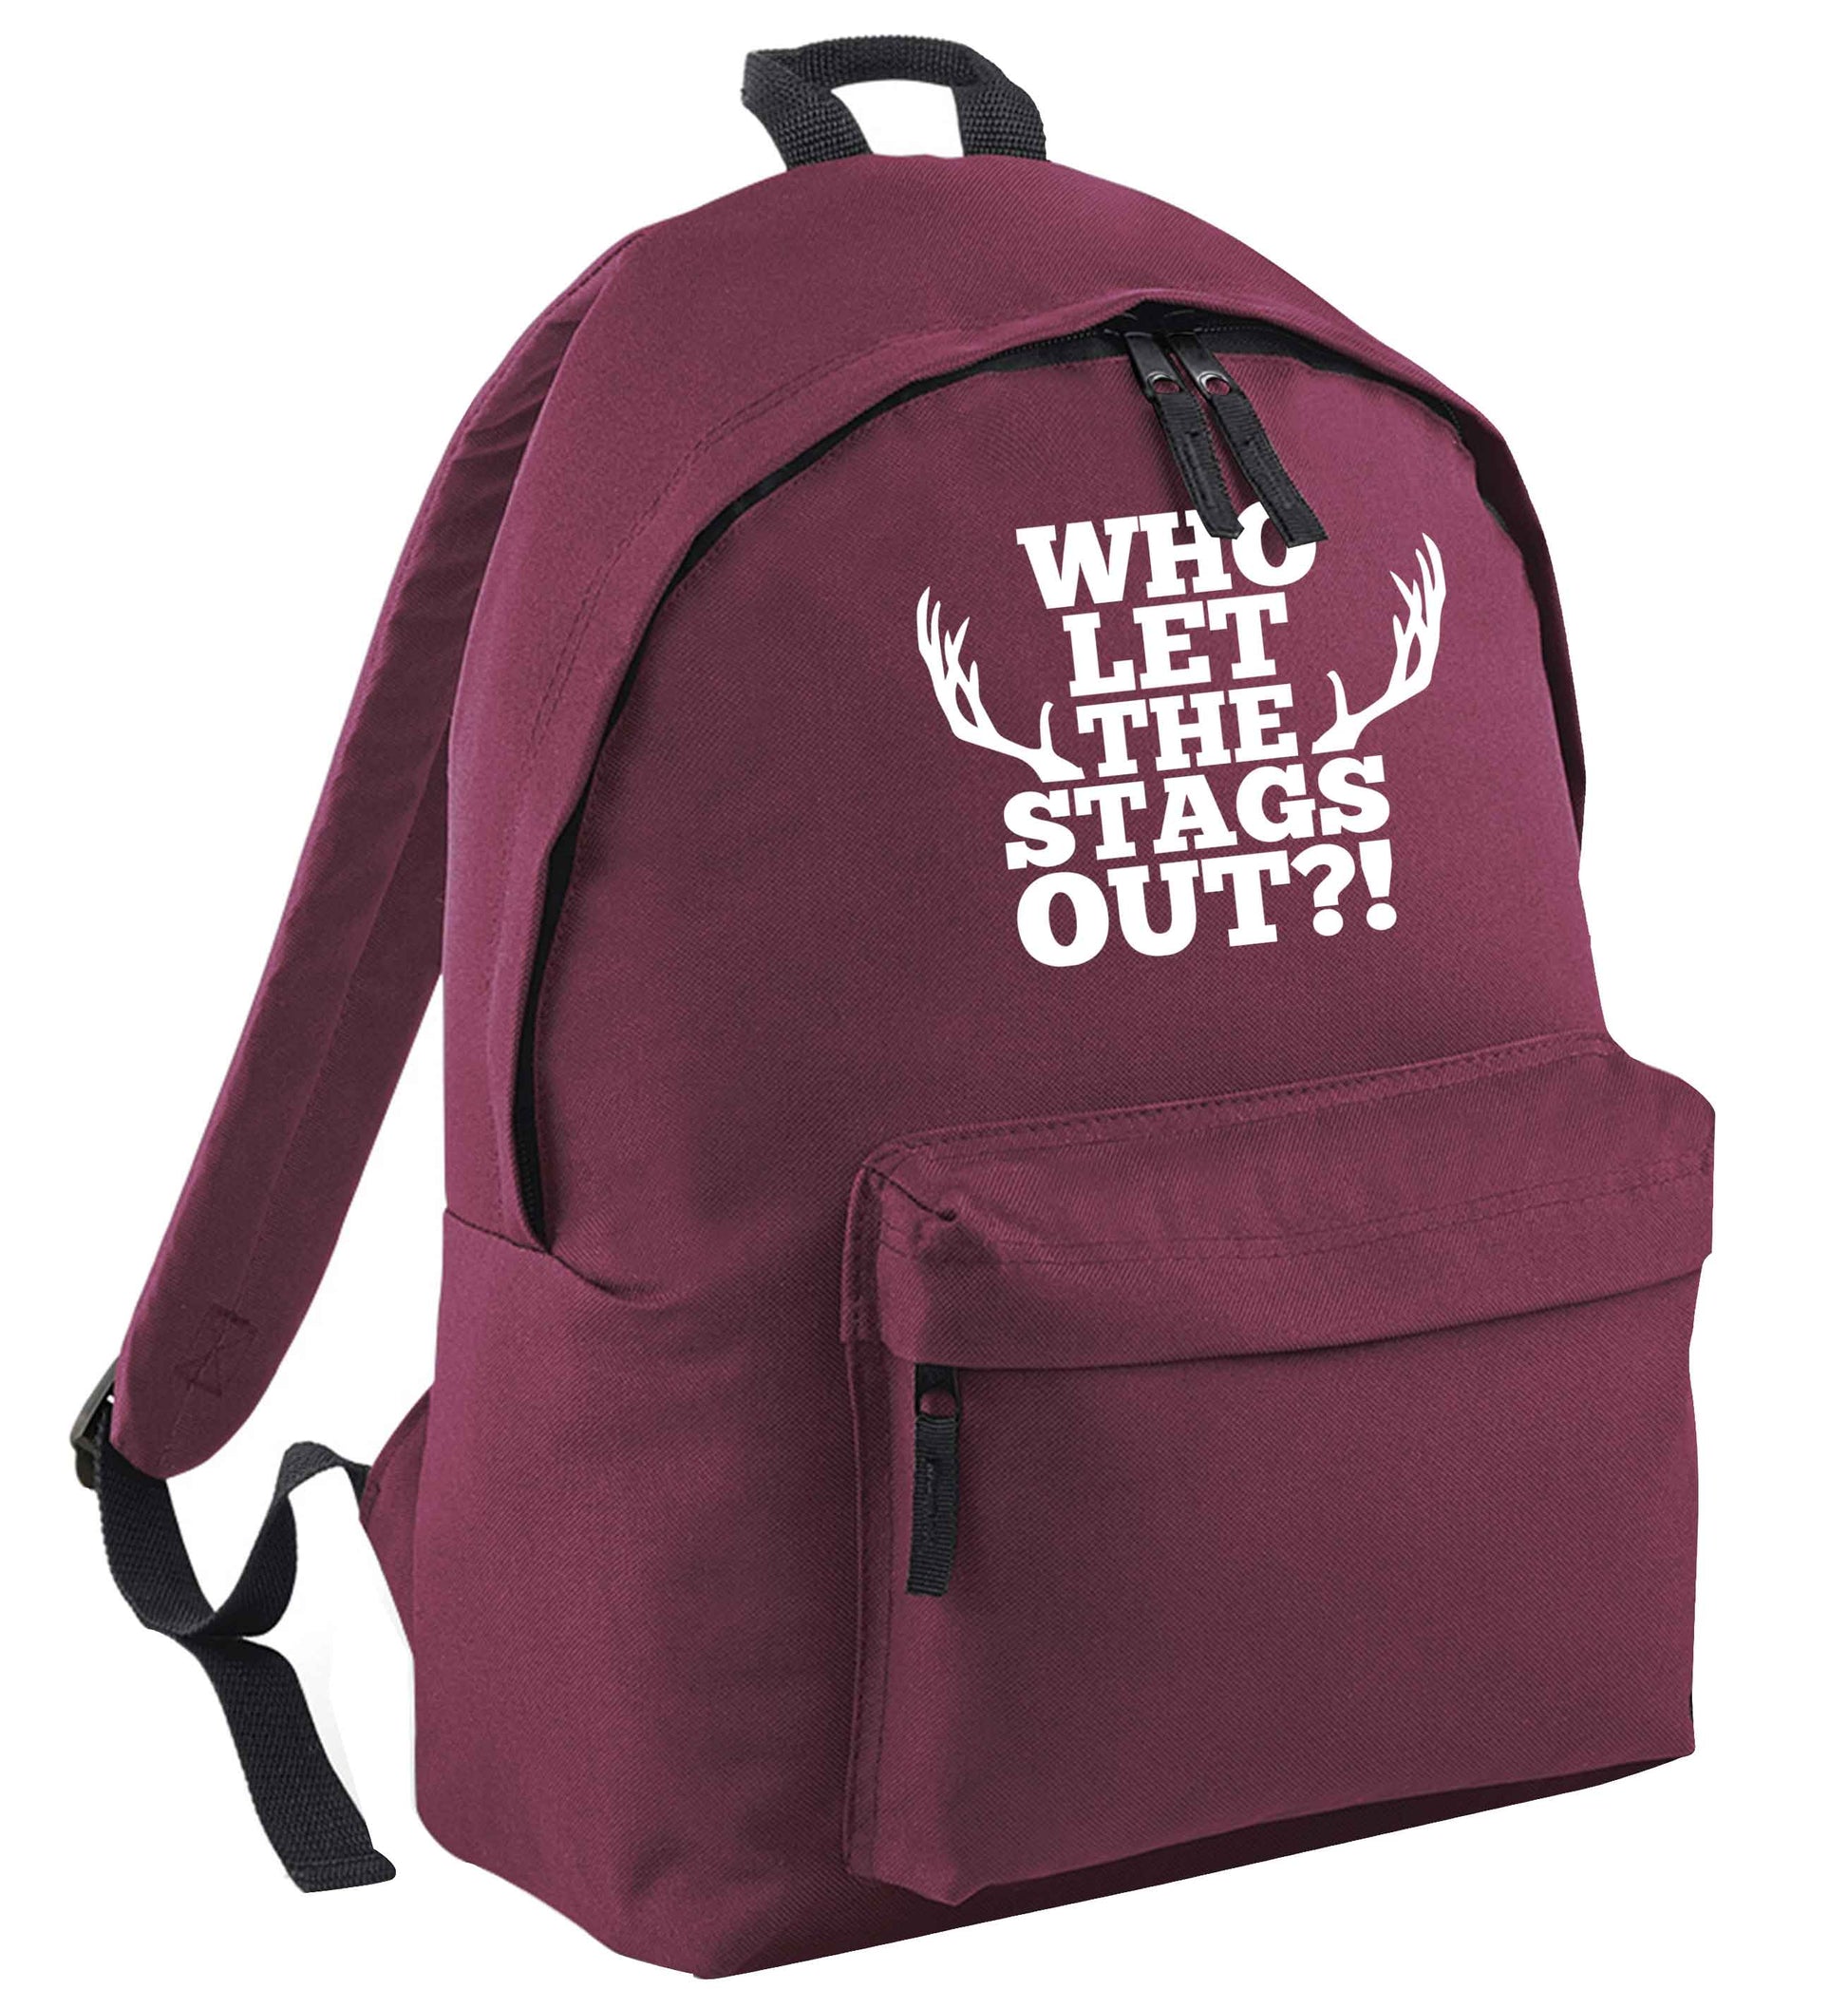 Who let the stags out maroon adults backpack